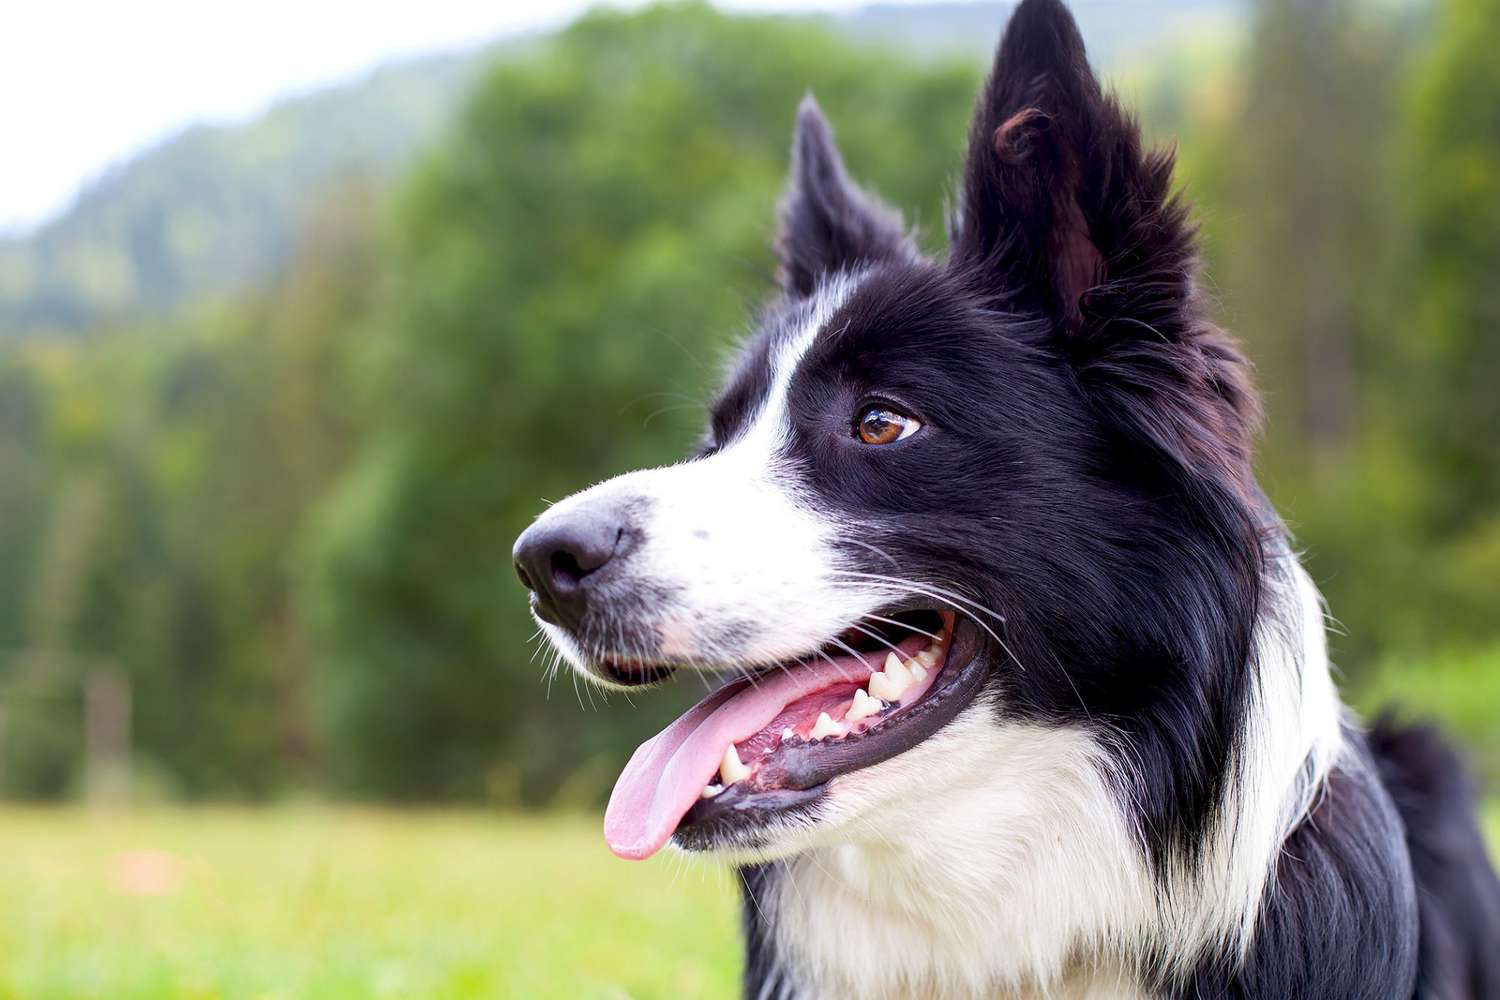 Profile shot of border collie outdoors near grassy field